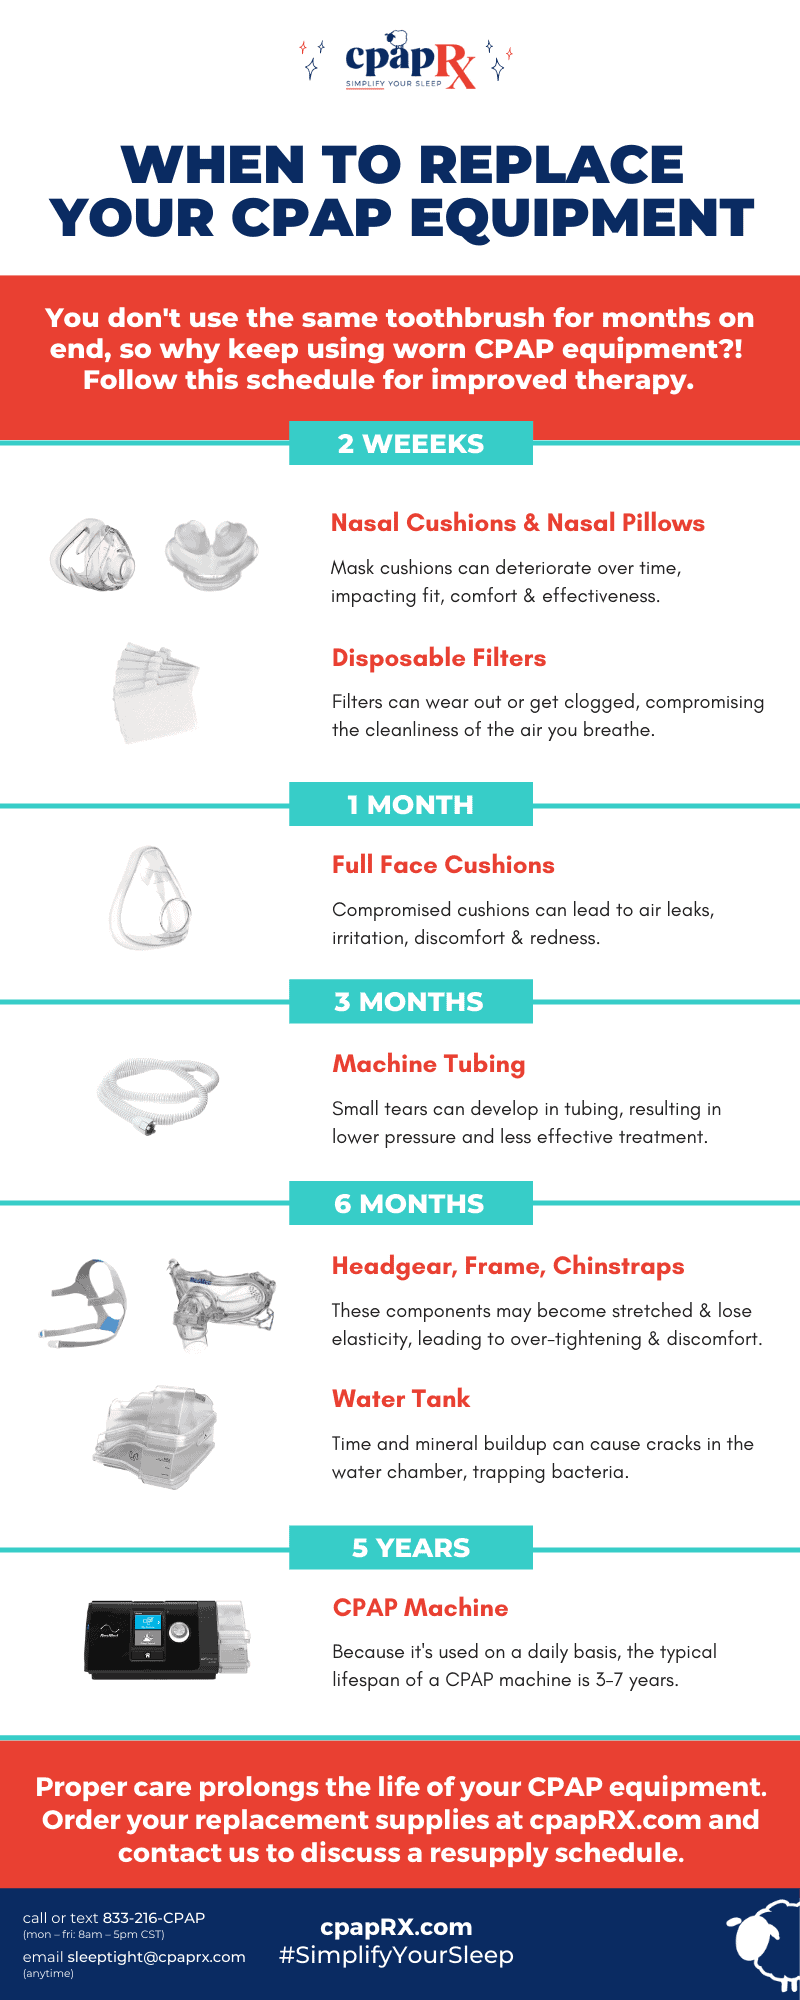 When to Replace Your CPAP Supplies - CPAP Replacement Schedule